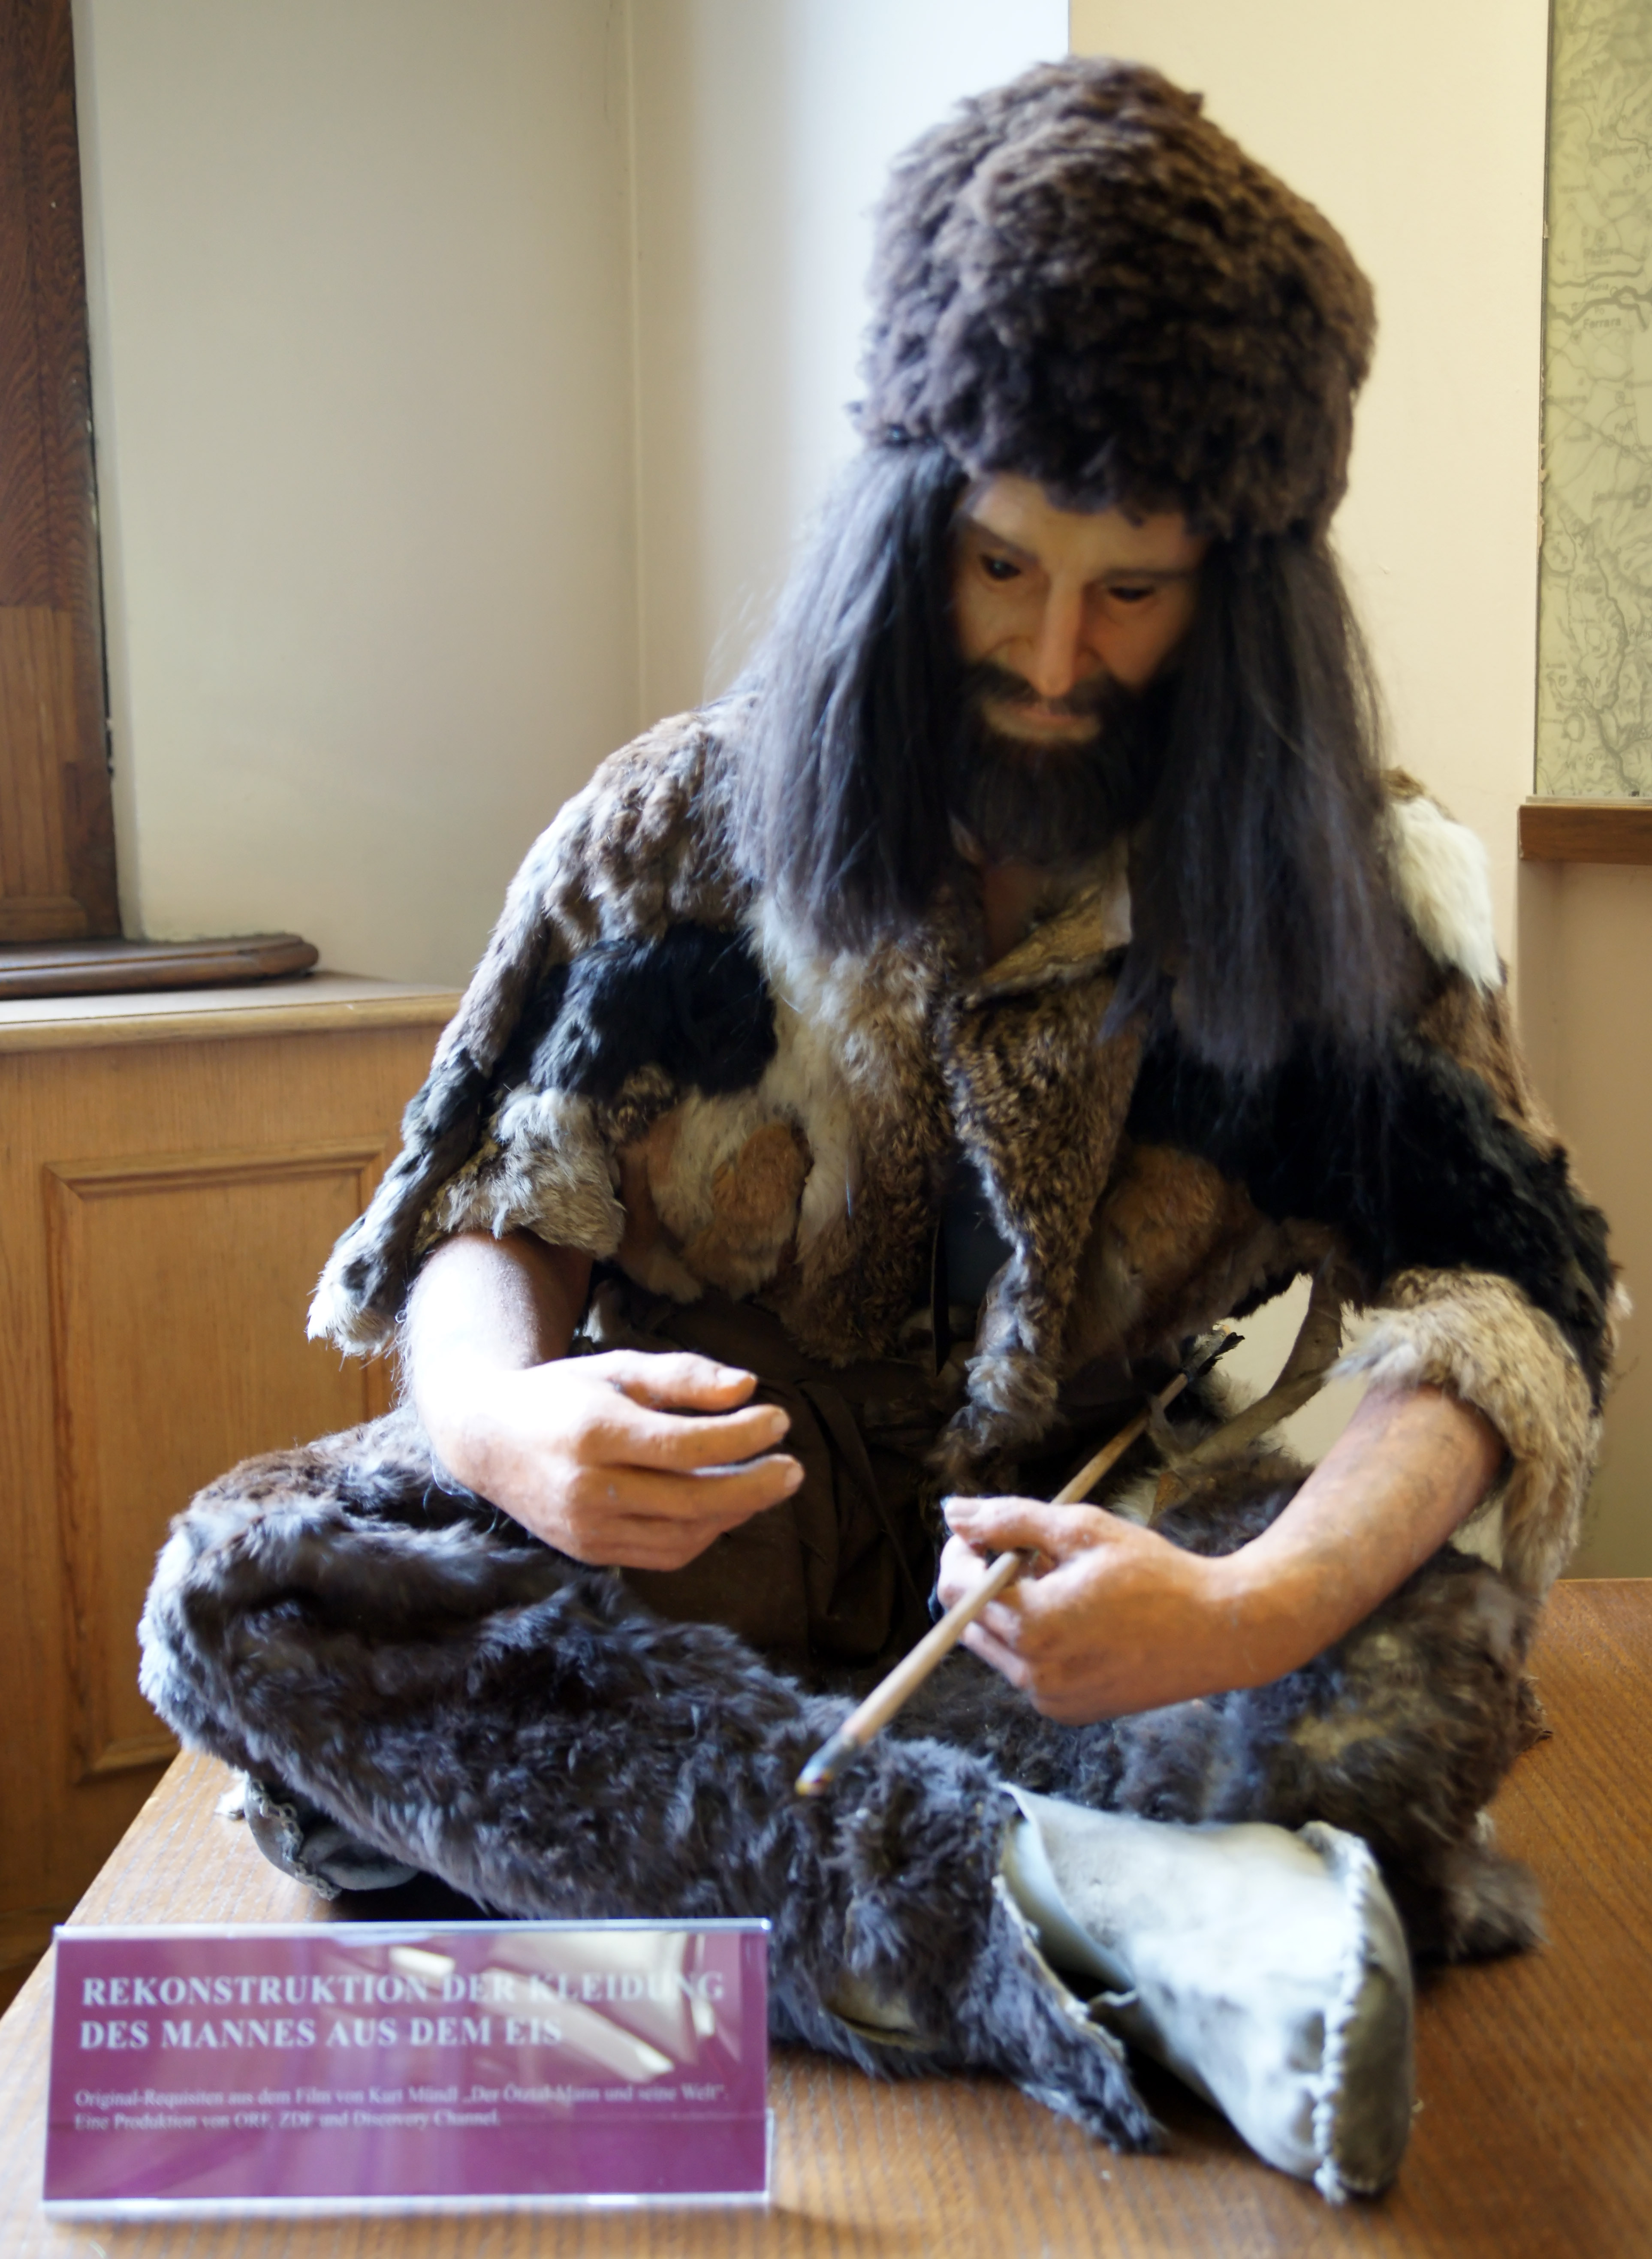 Tzi the iceman and the lifestyle of bronze age people